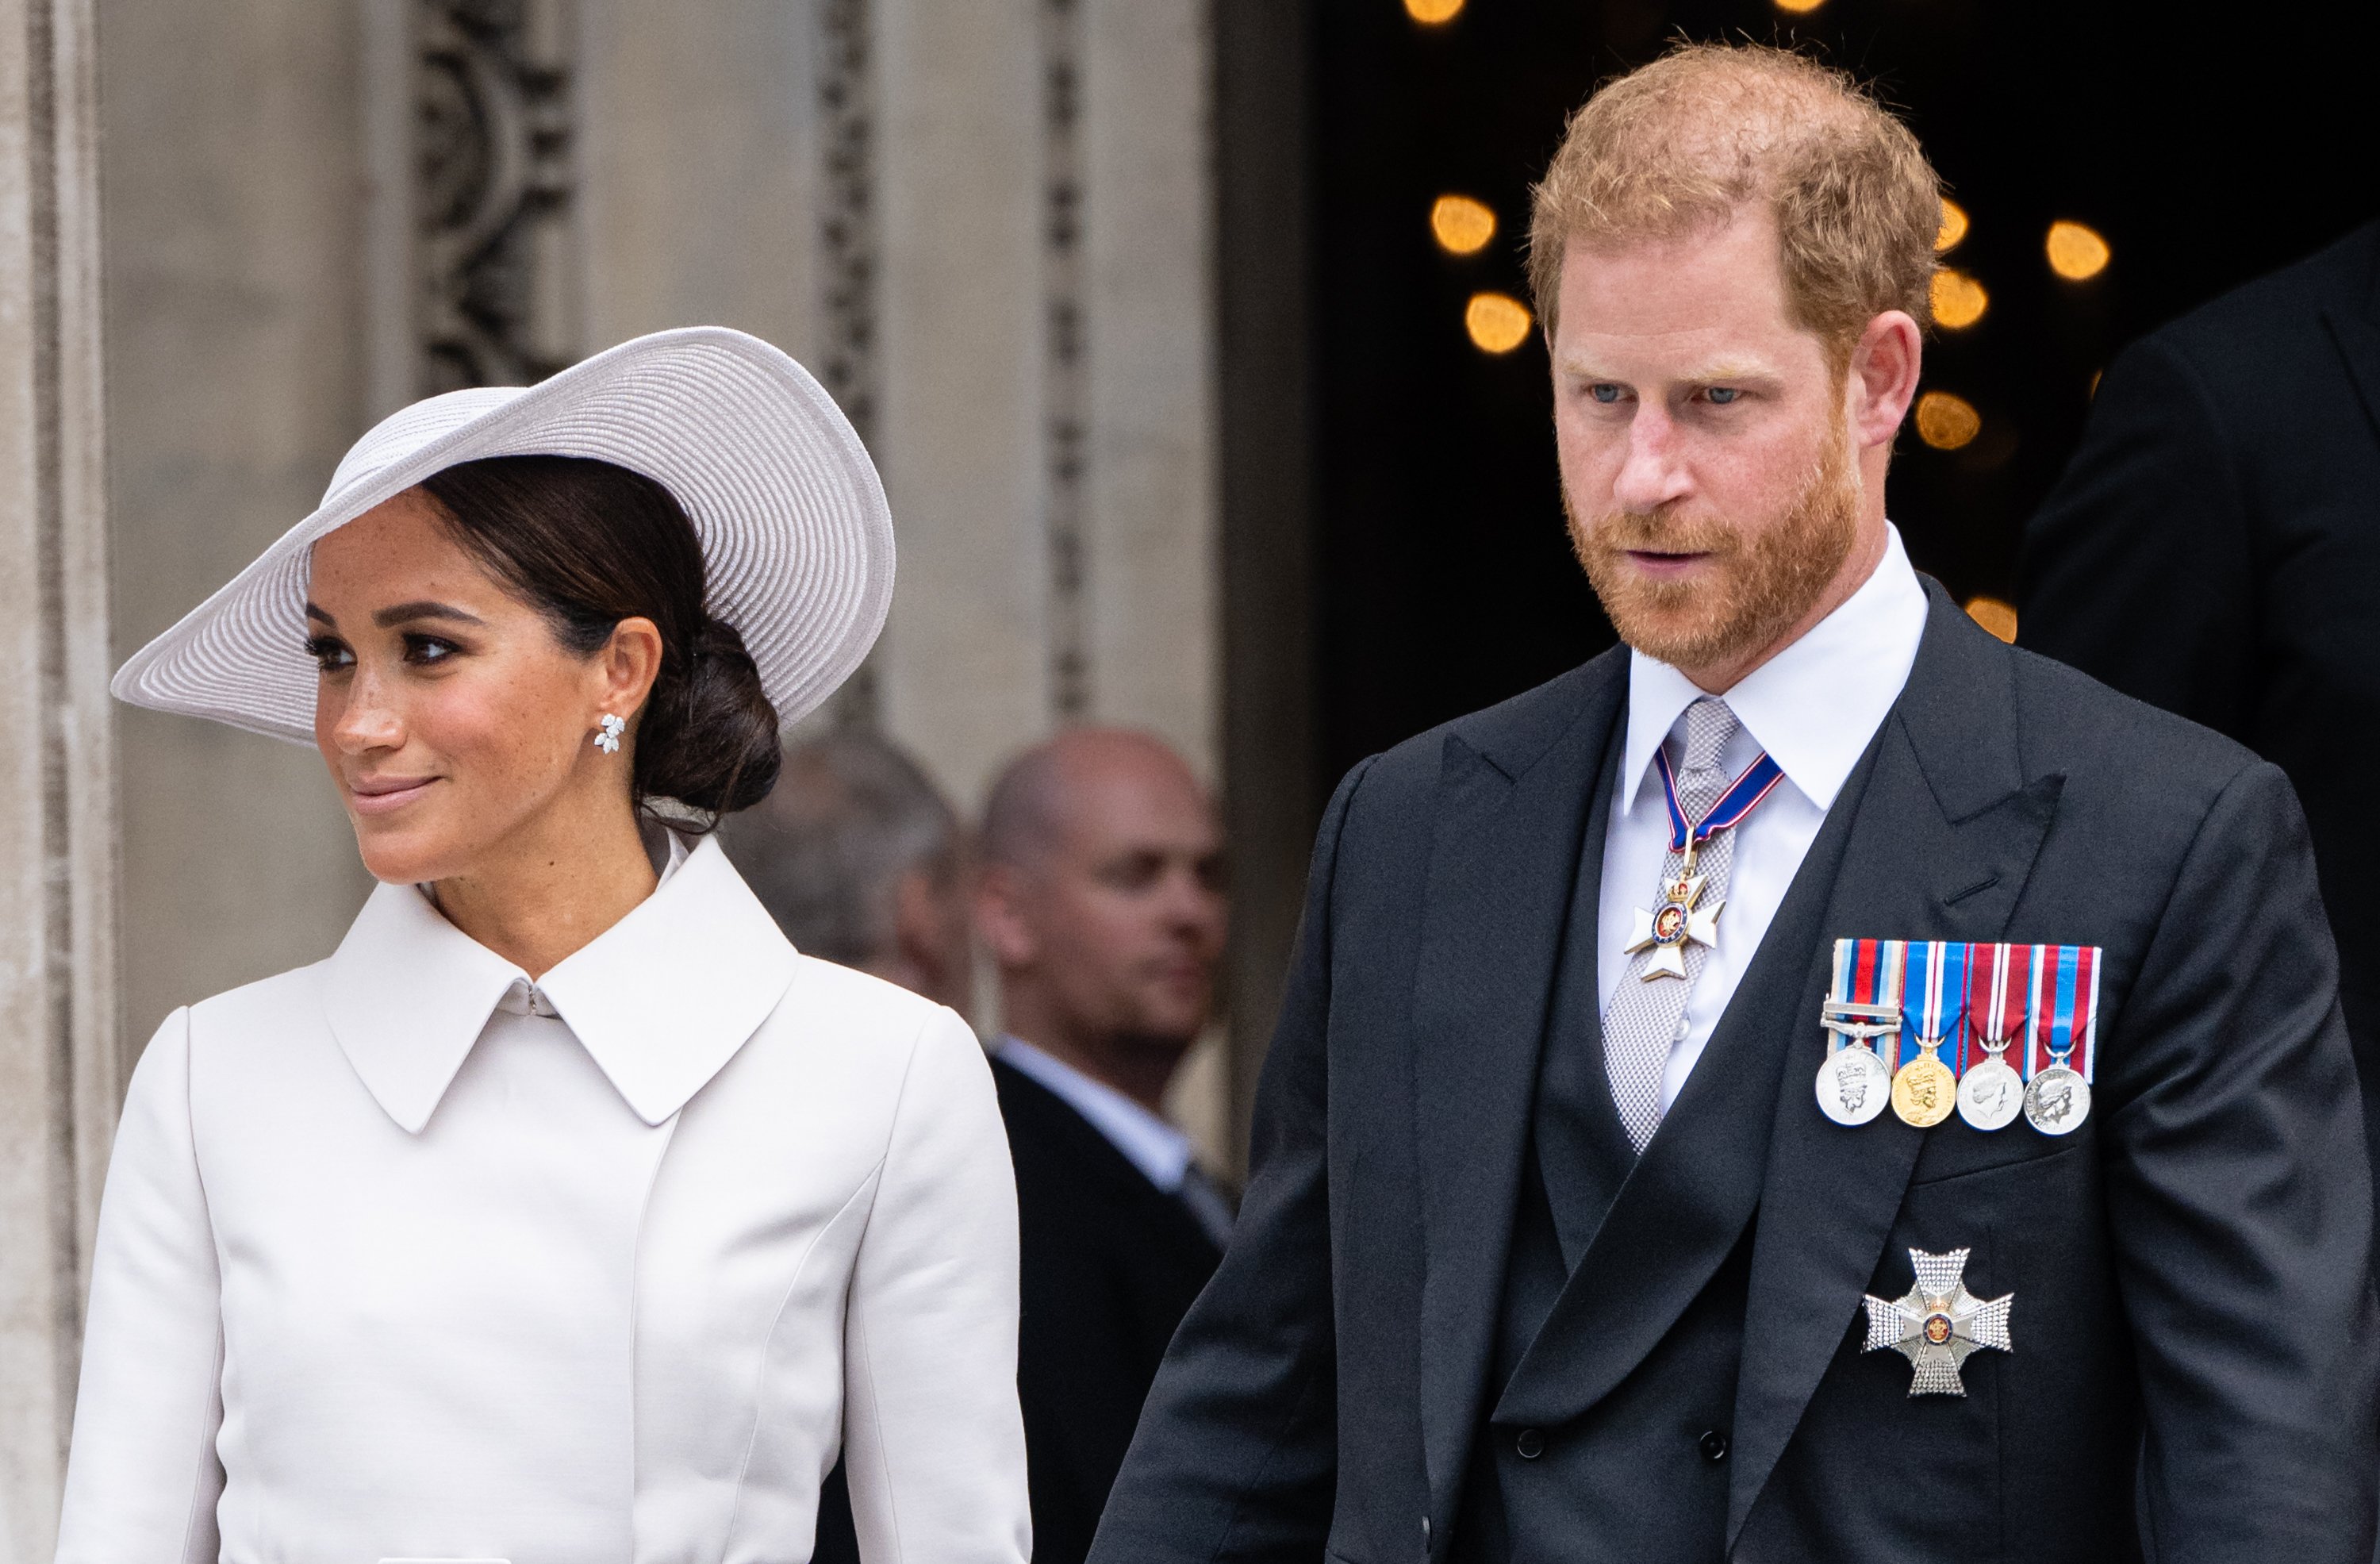 Meghan Markle, Duchess of Sussex and Prince Harry, Duke of Sussex attending the National Service of Thanksgiving at St Paul's Cathedral on June 03, 2022 in London, England. | Source: Getty Images